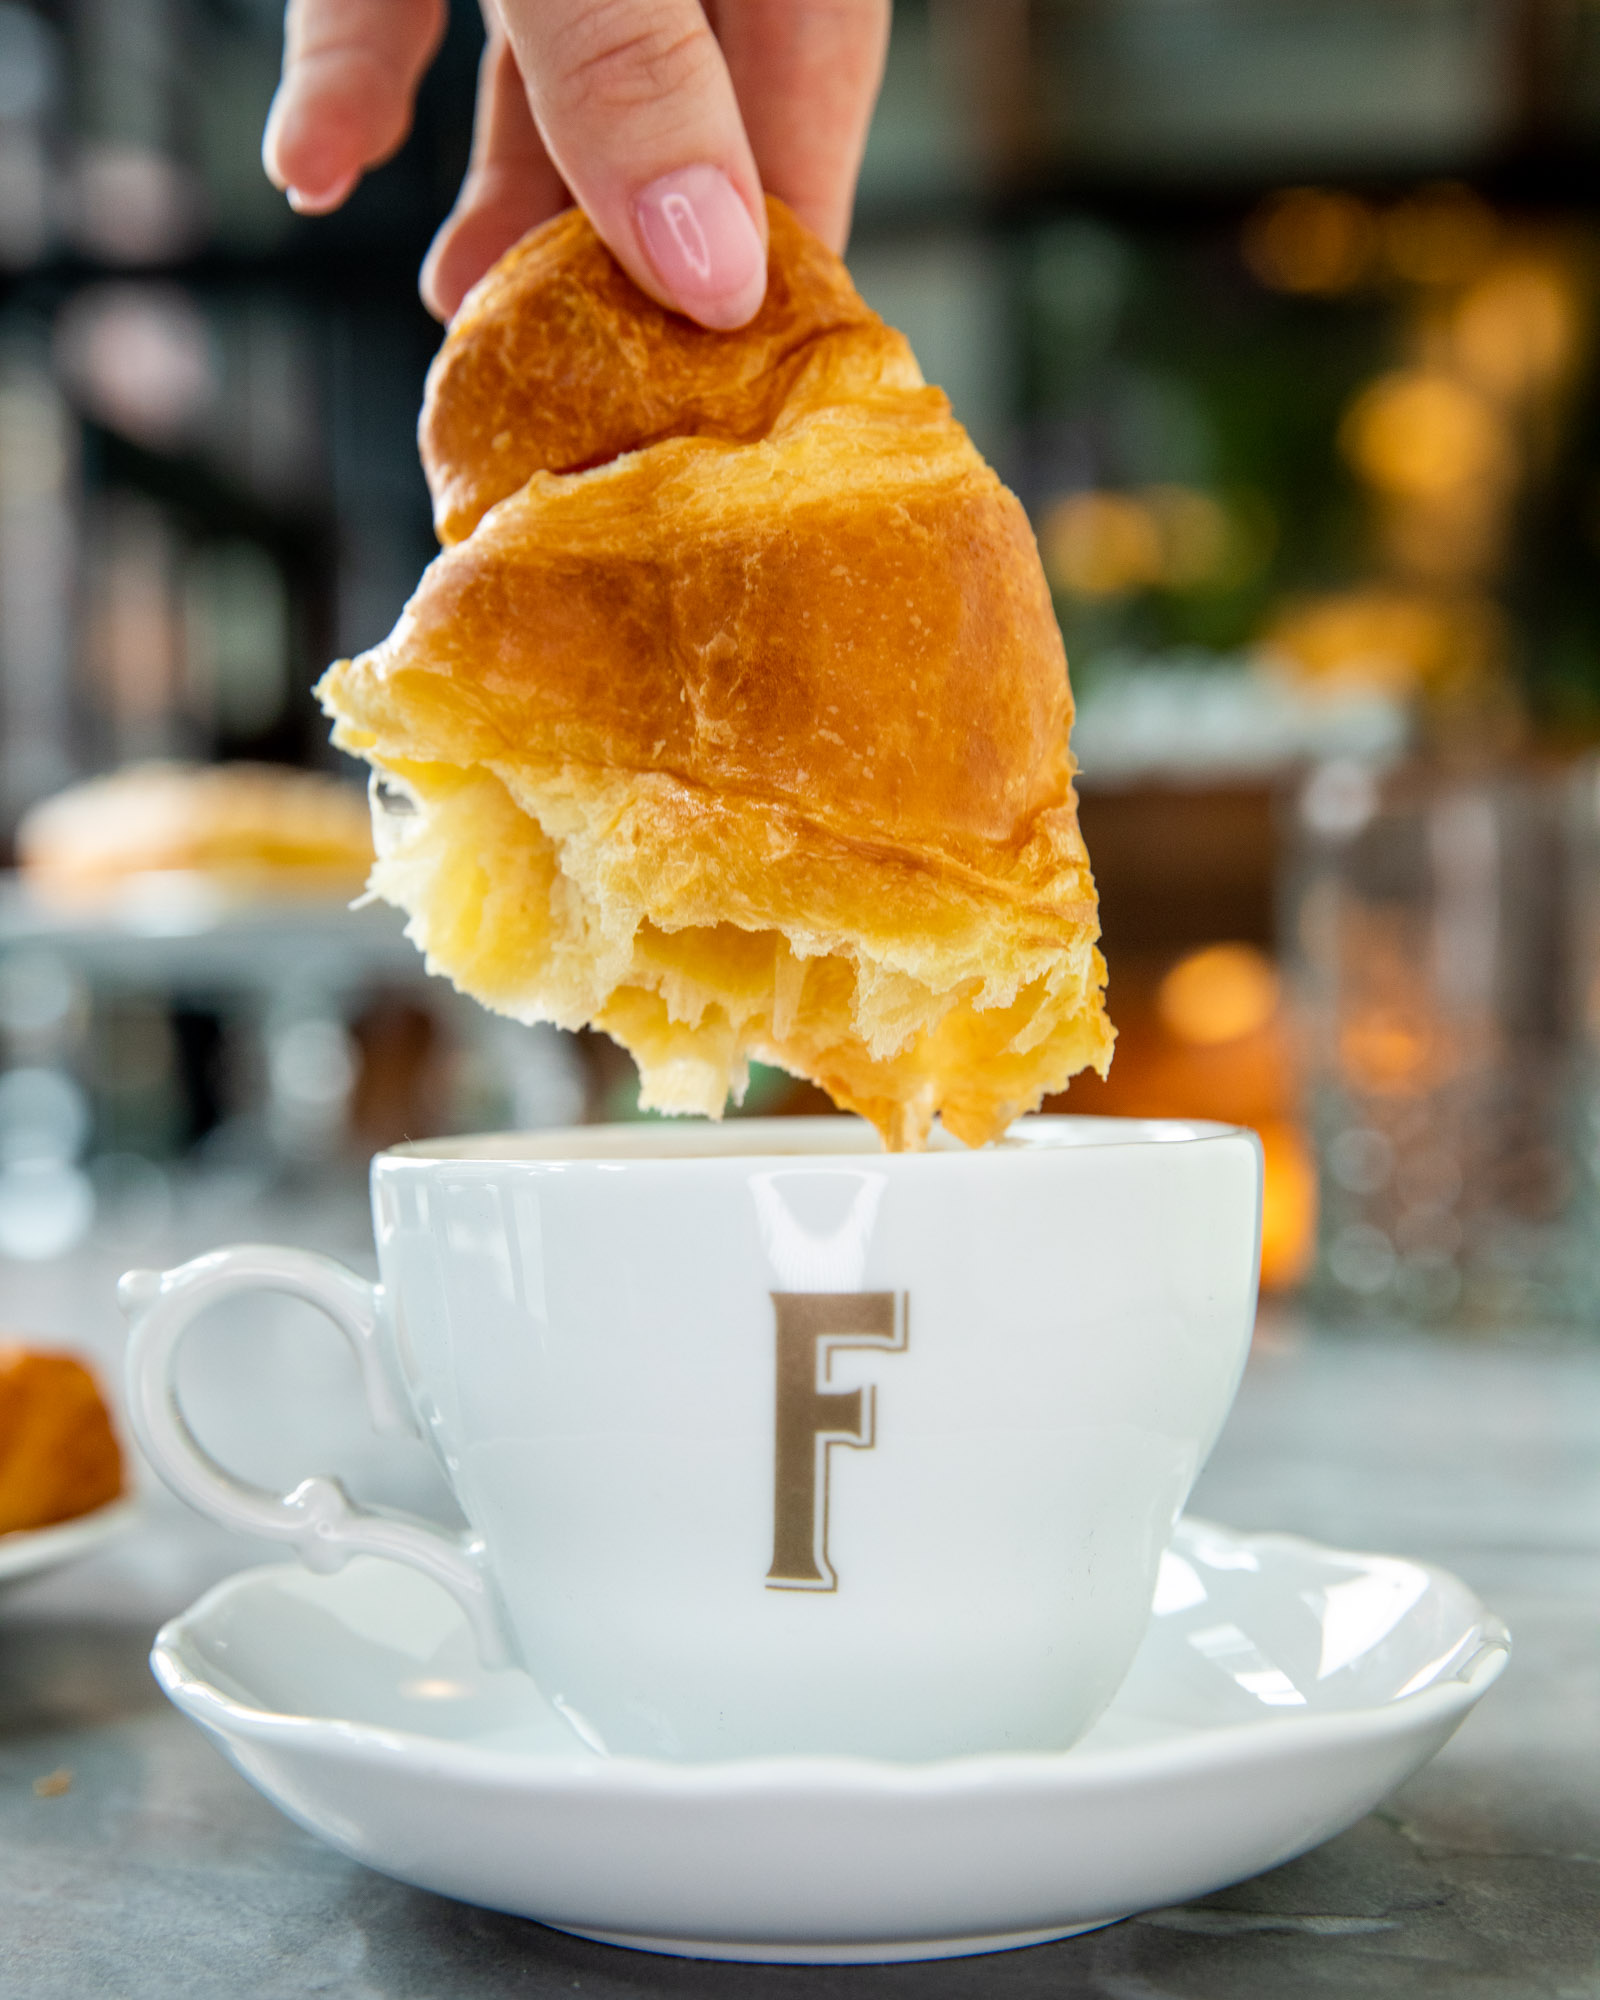 Croissant being dipped in a cup of coffee